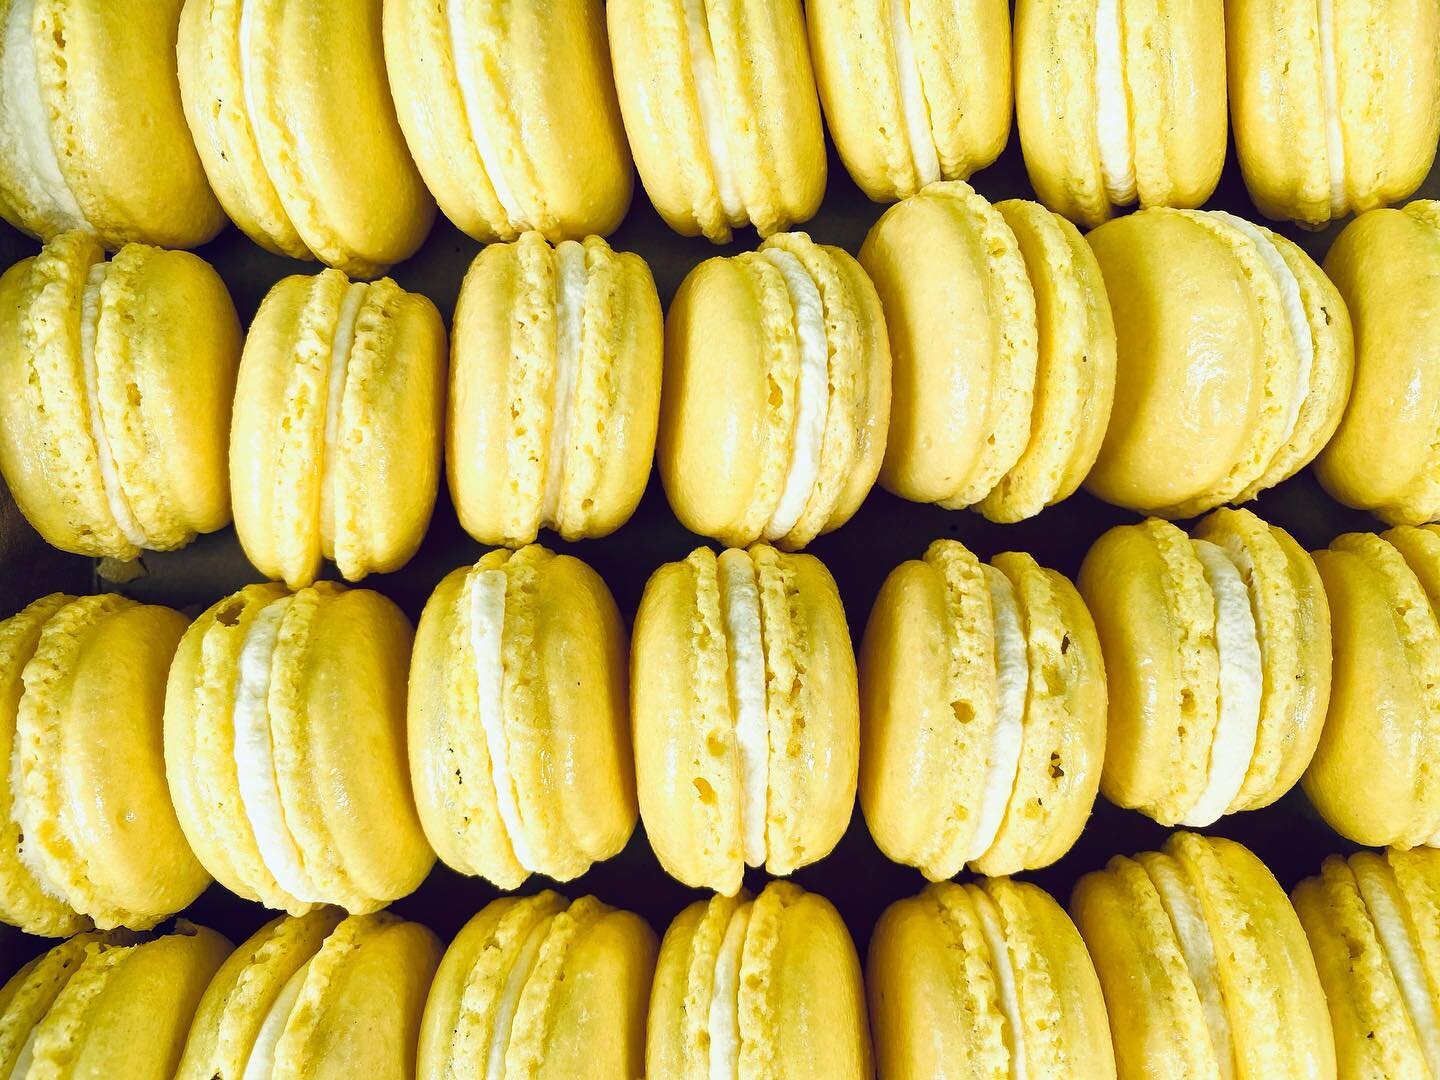 Limoncello ganache macarons, need we say more? Made with our hand-zested limoncello, these are bursting with a bright, citrus flavor! 🍋 #limoncello #macarons #macaronstagram #macaron #craftspirits #craftdistillery #distillery #trysomethingnew #lemon